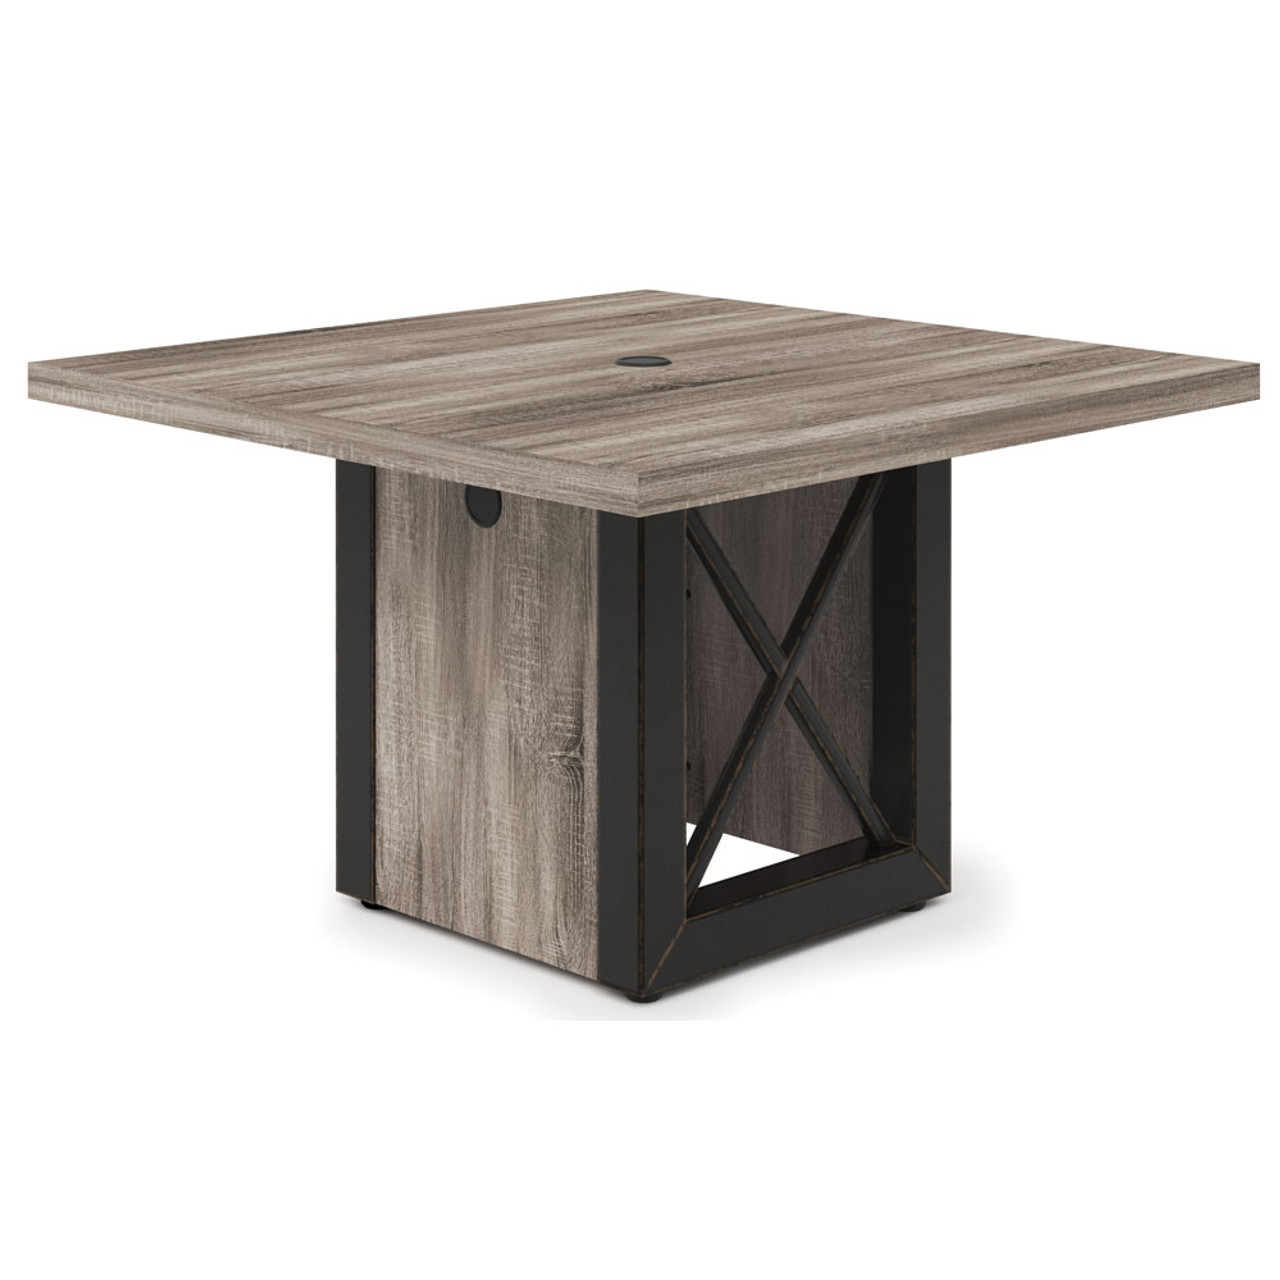 Riveted | Square Conference Table with Cubed Base